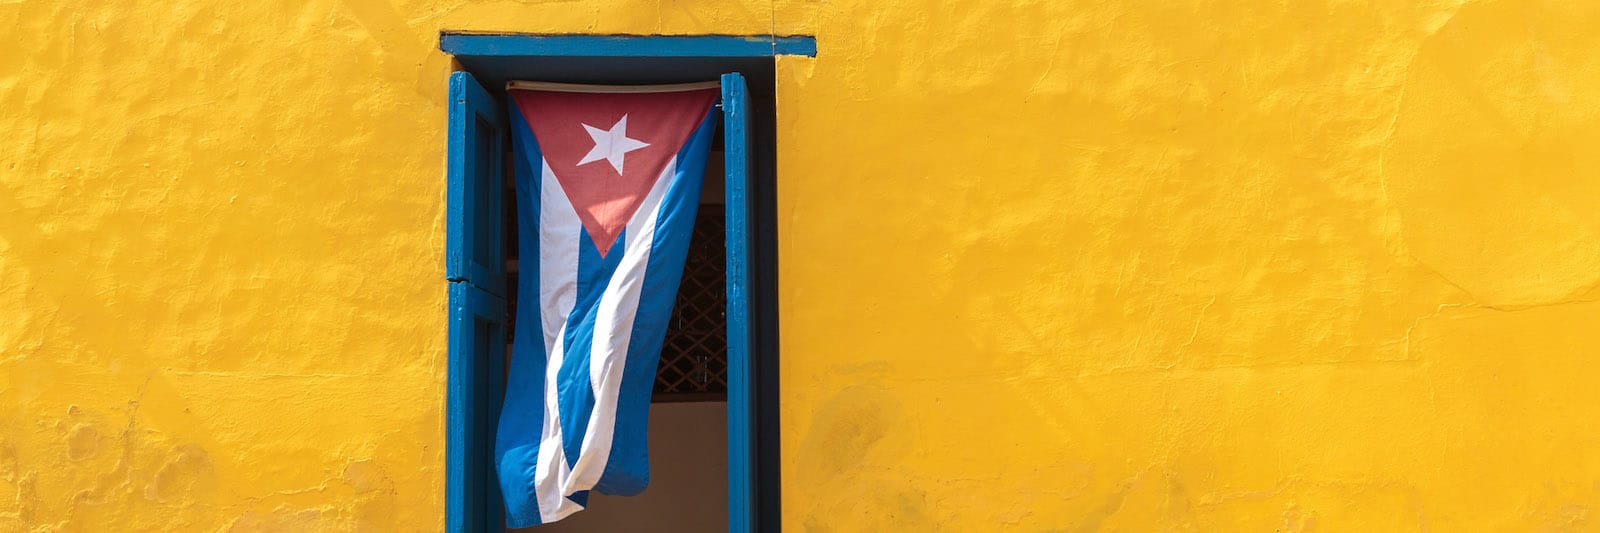 Useful Things To Know When Planning A Trip to Cuba